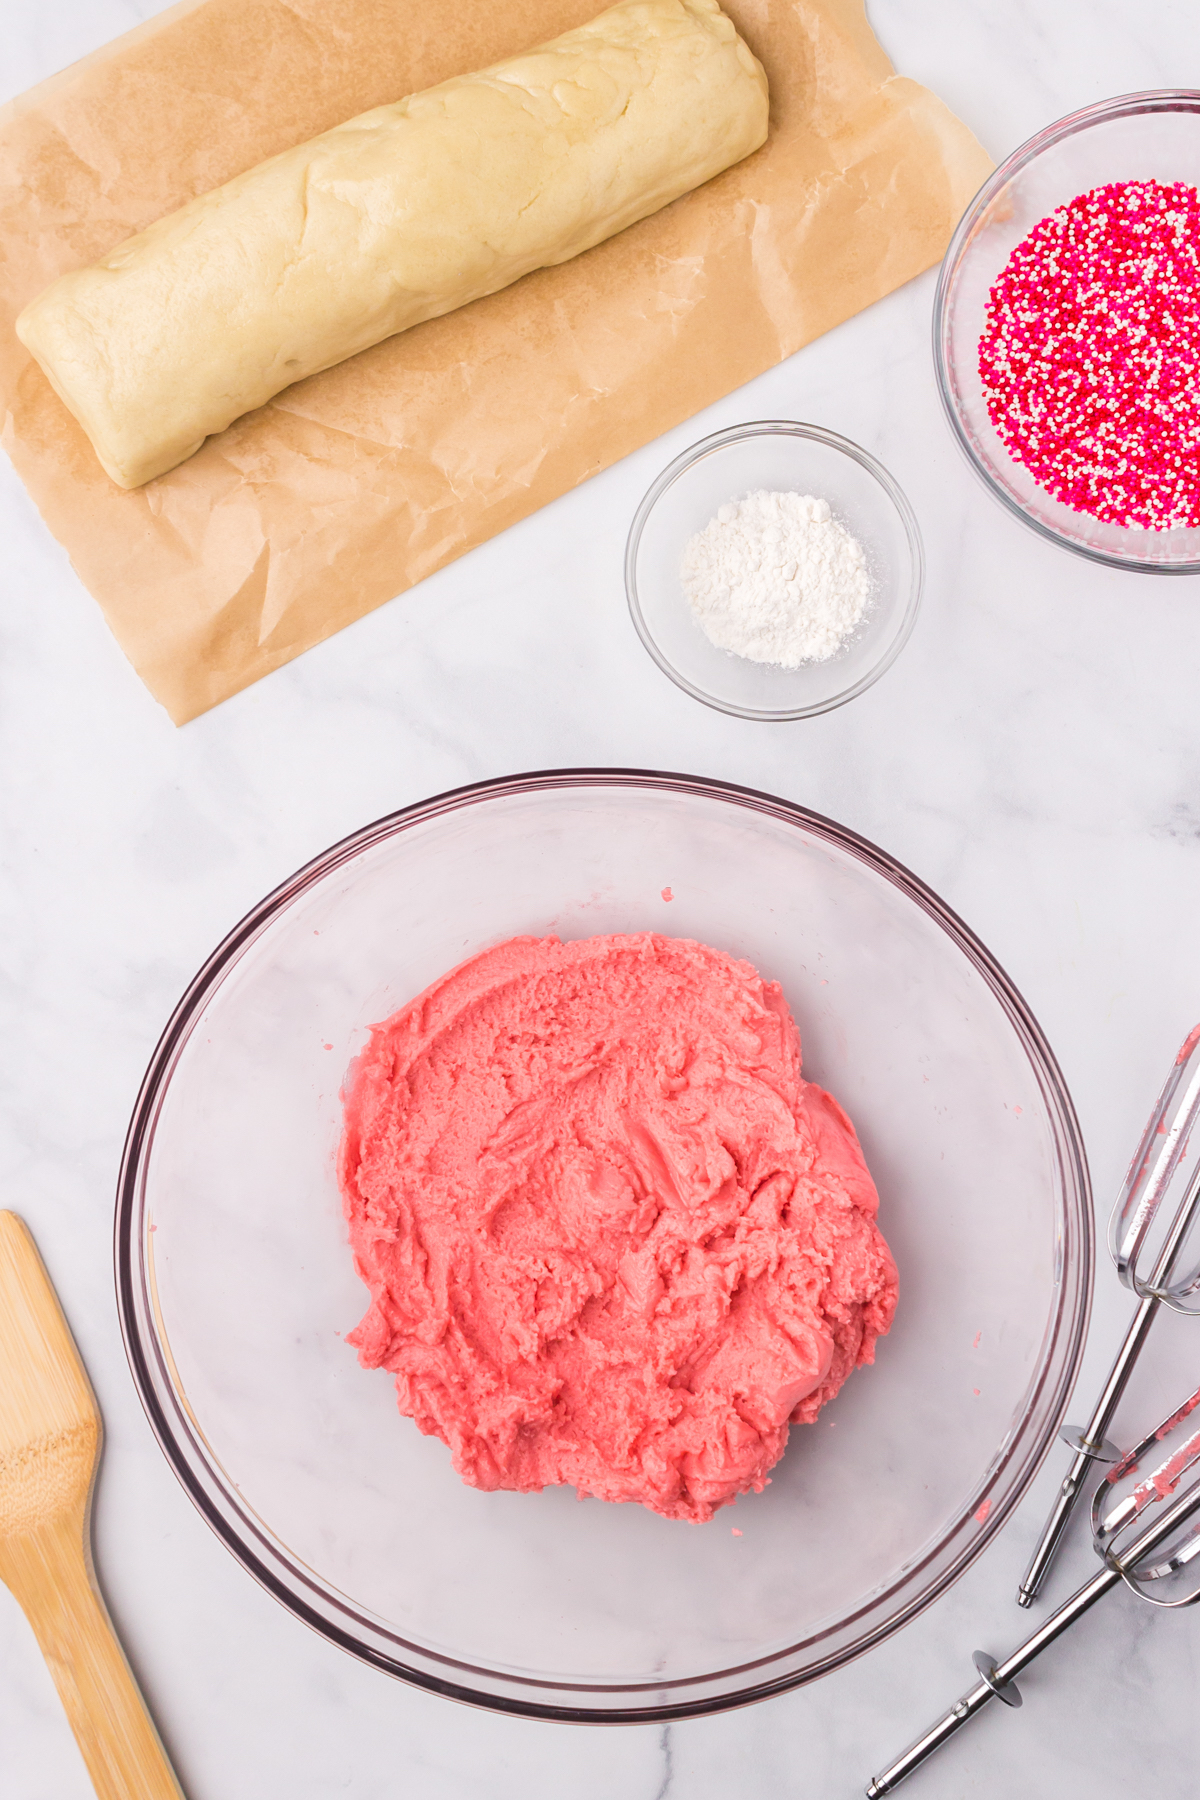 Sugar cookie dough dyed pink with sprinkles, flour, and dough in background.